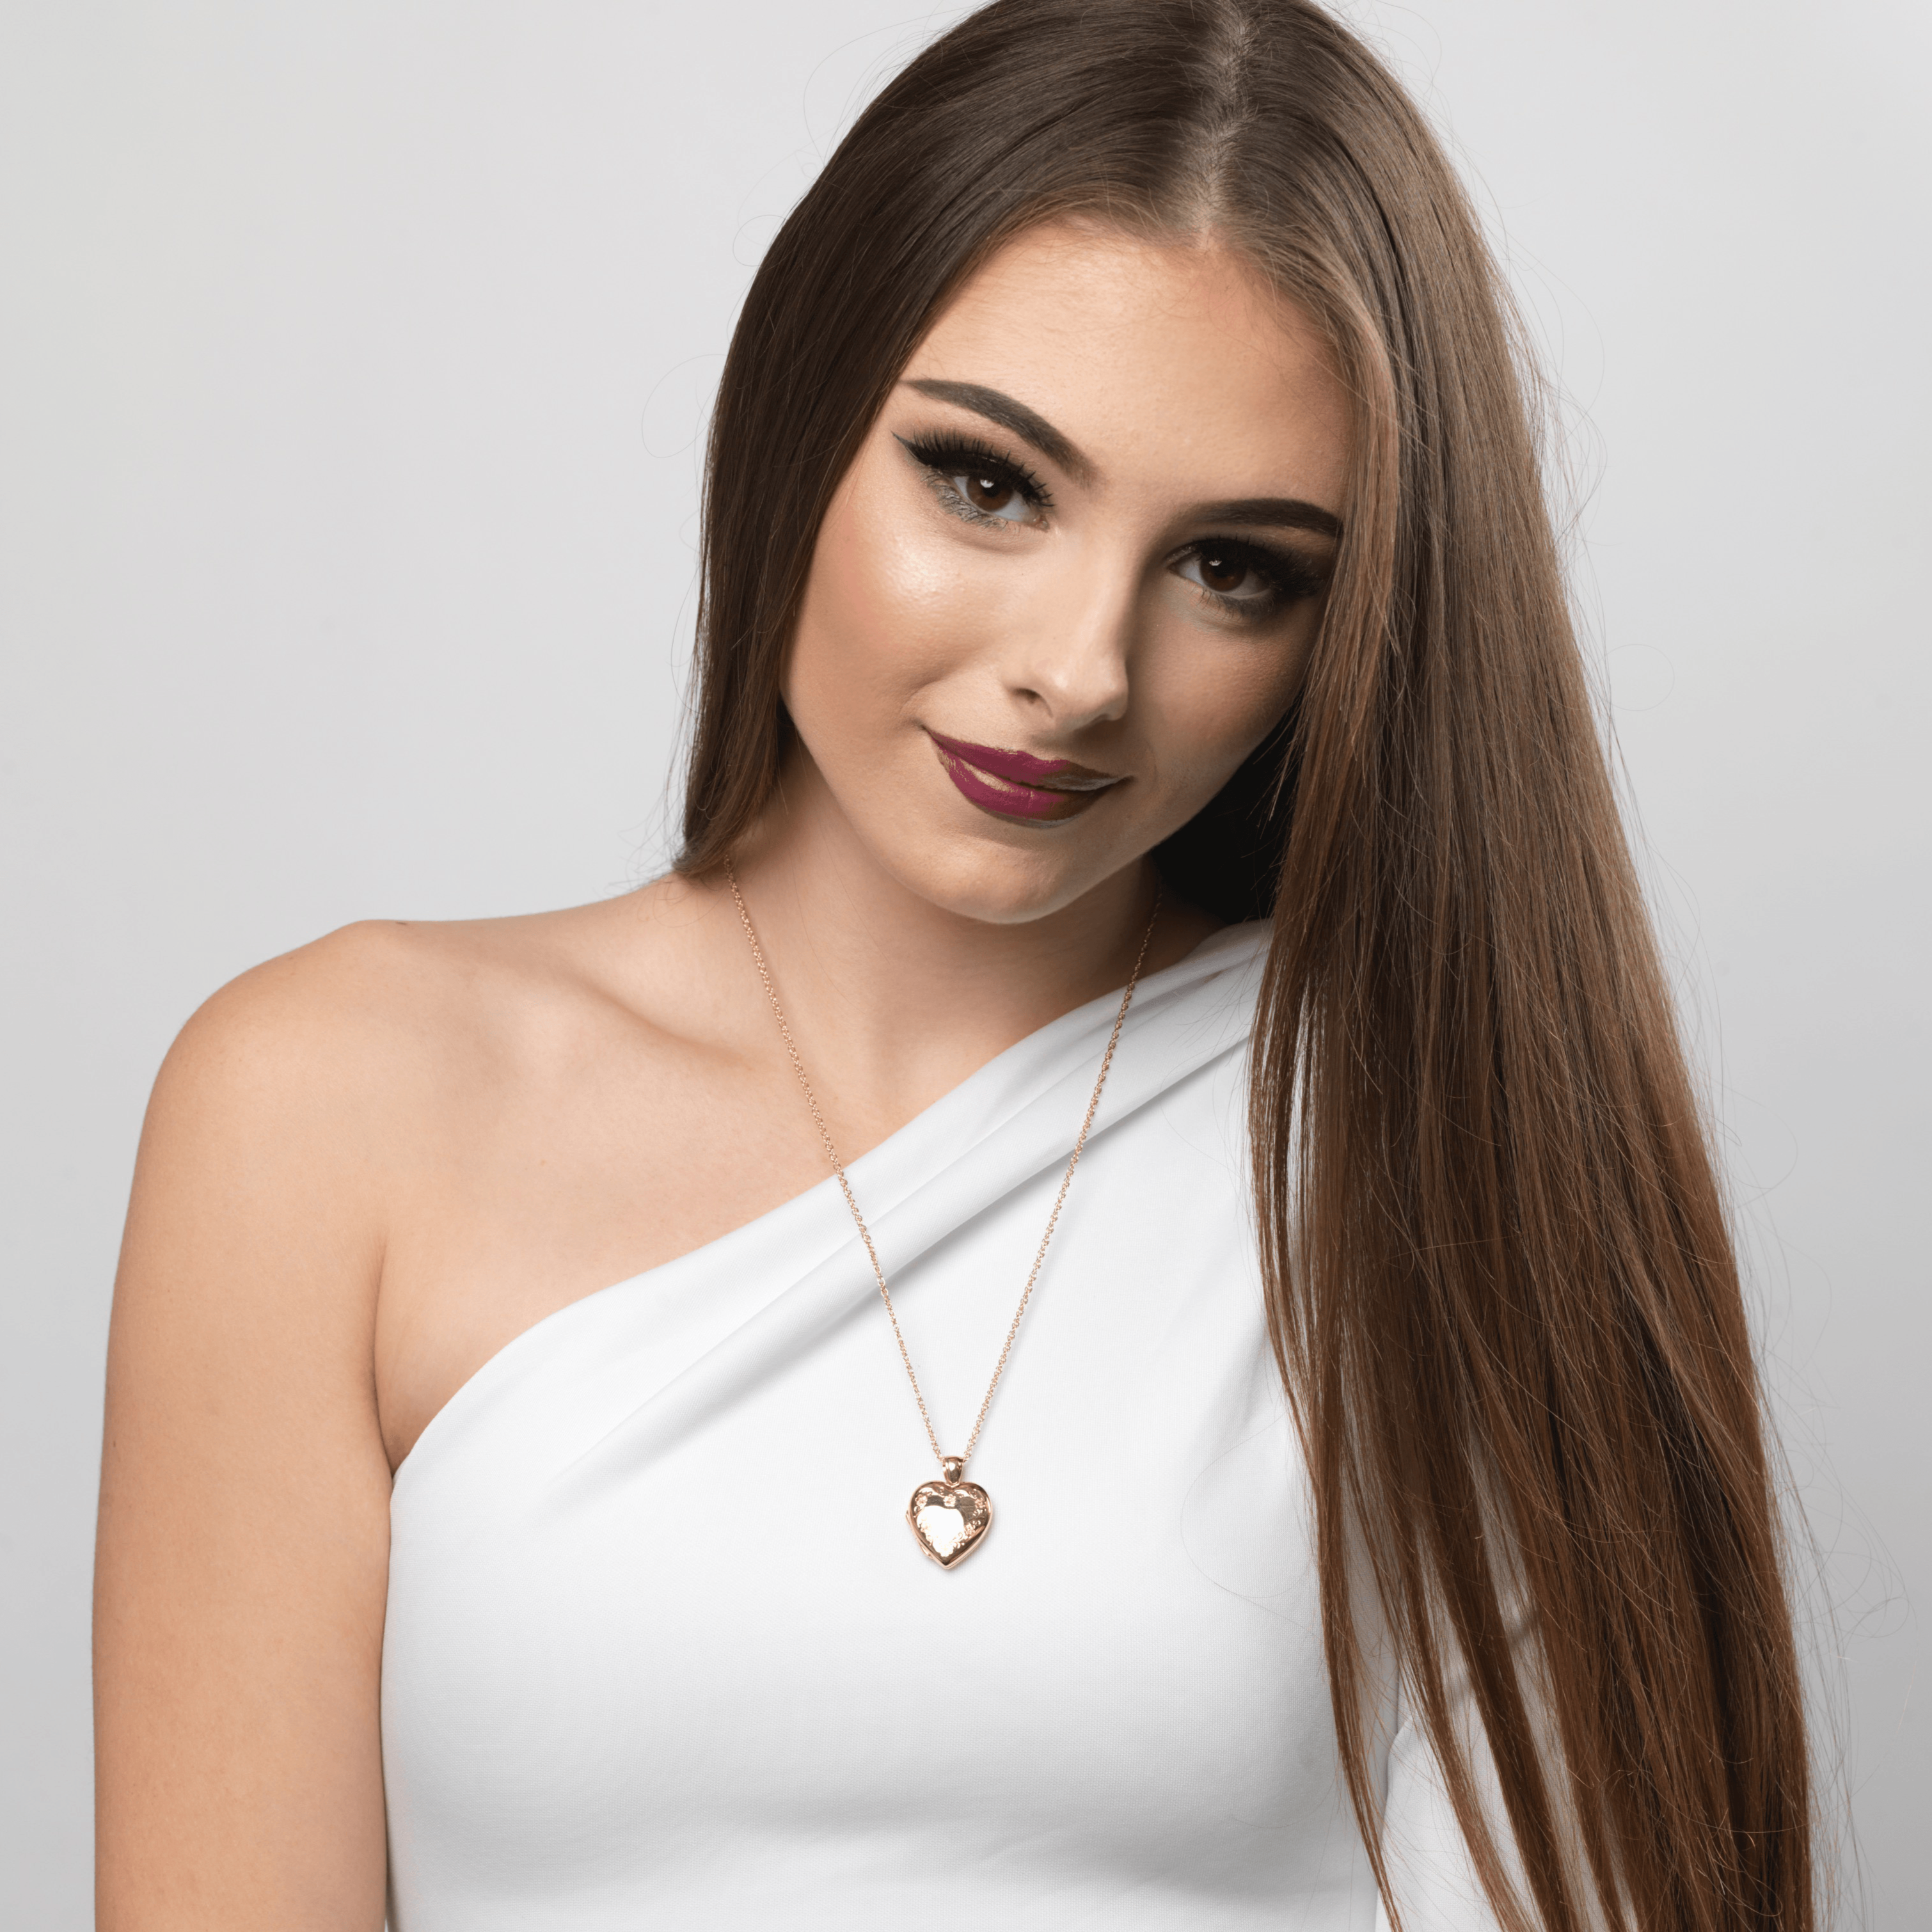 Model wearing an 18 ct gold heart locket engraved with a flral border on an 18 ct gold franco chain